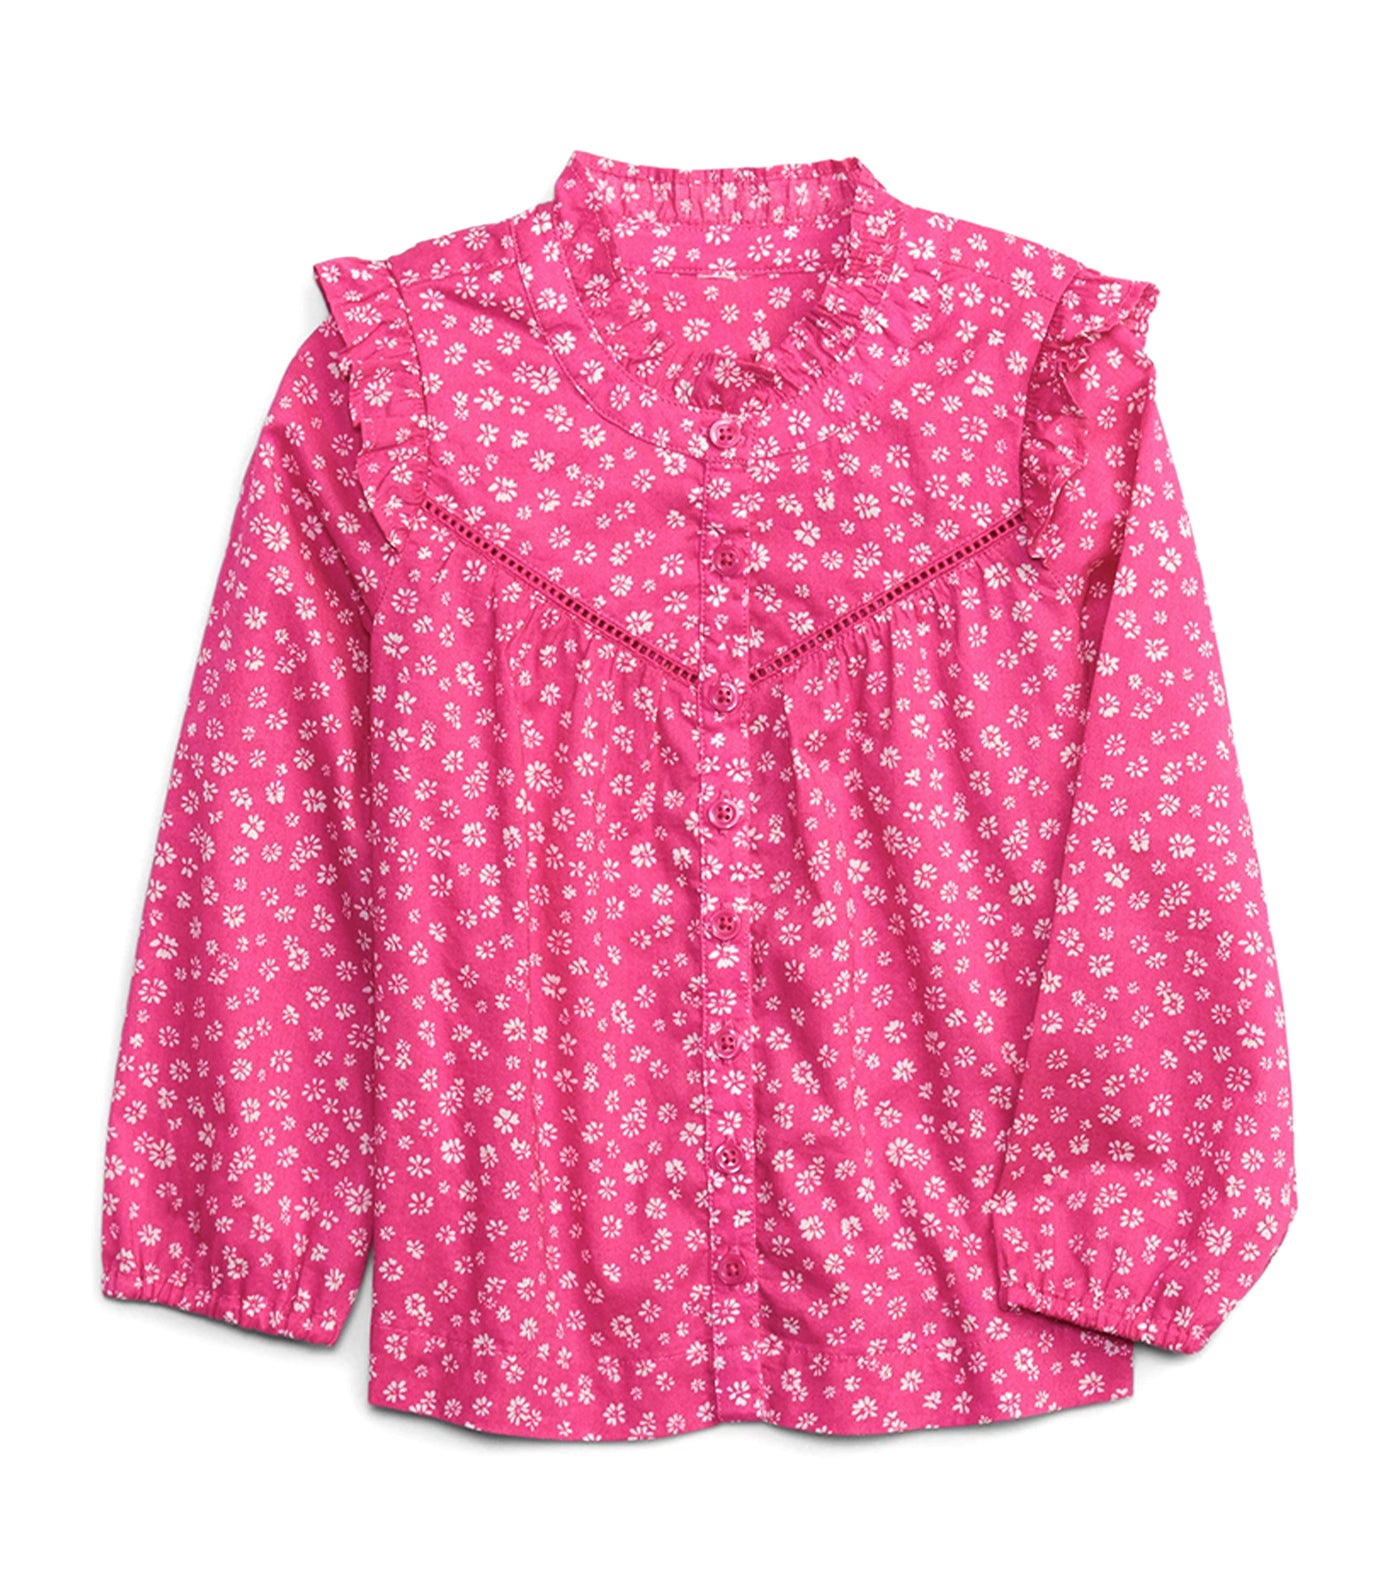 Toddler Ruffle Button-Down Shirt - Aug Pink Ditsy